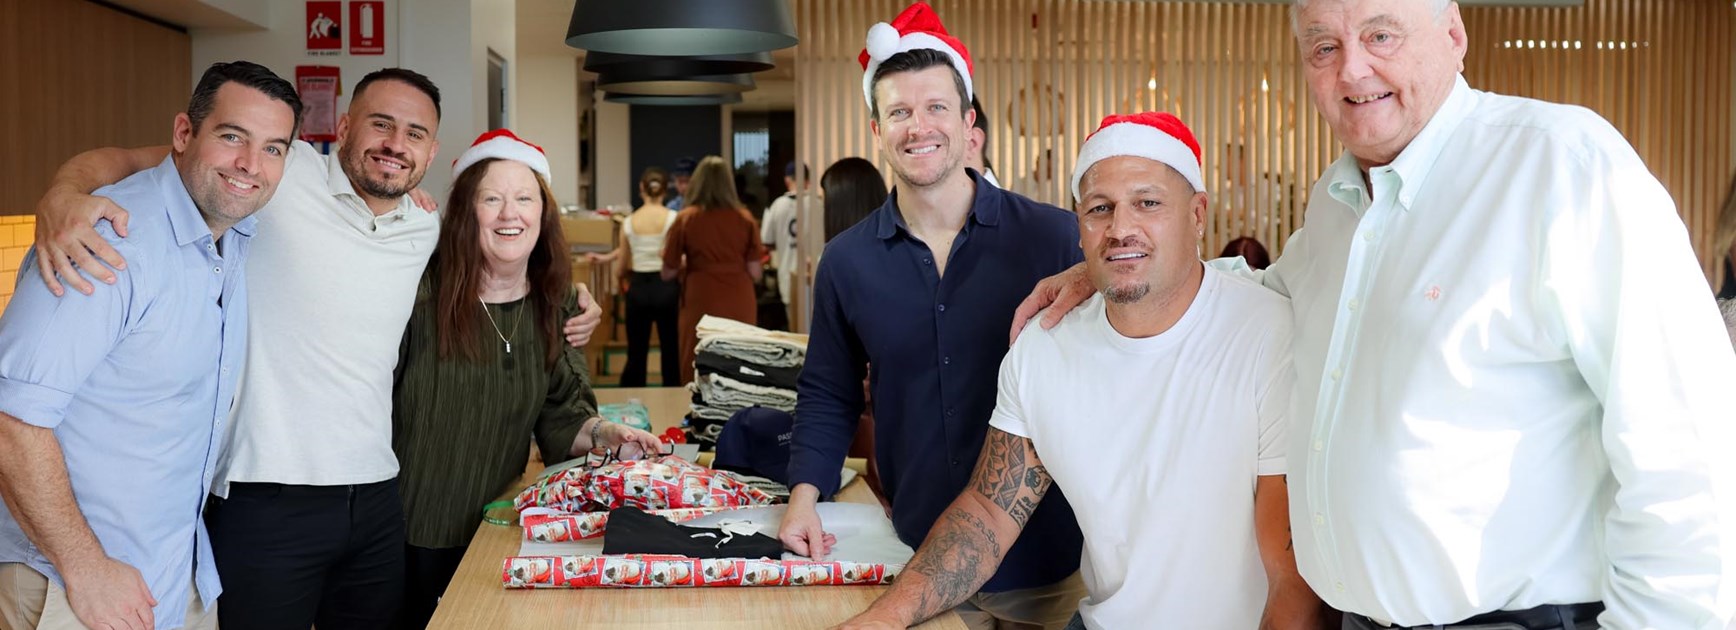 The Bulldogs joined forces with Laundy Hotels staff yesterday, helping to wrap over 400 XMAS gifts for Pass it On's third annual XMAS gifting campaign for the homeless.